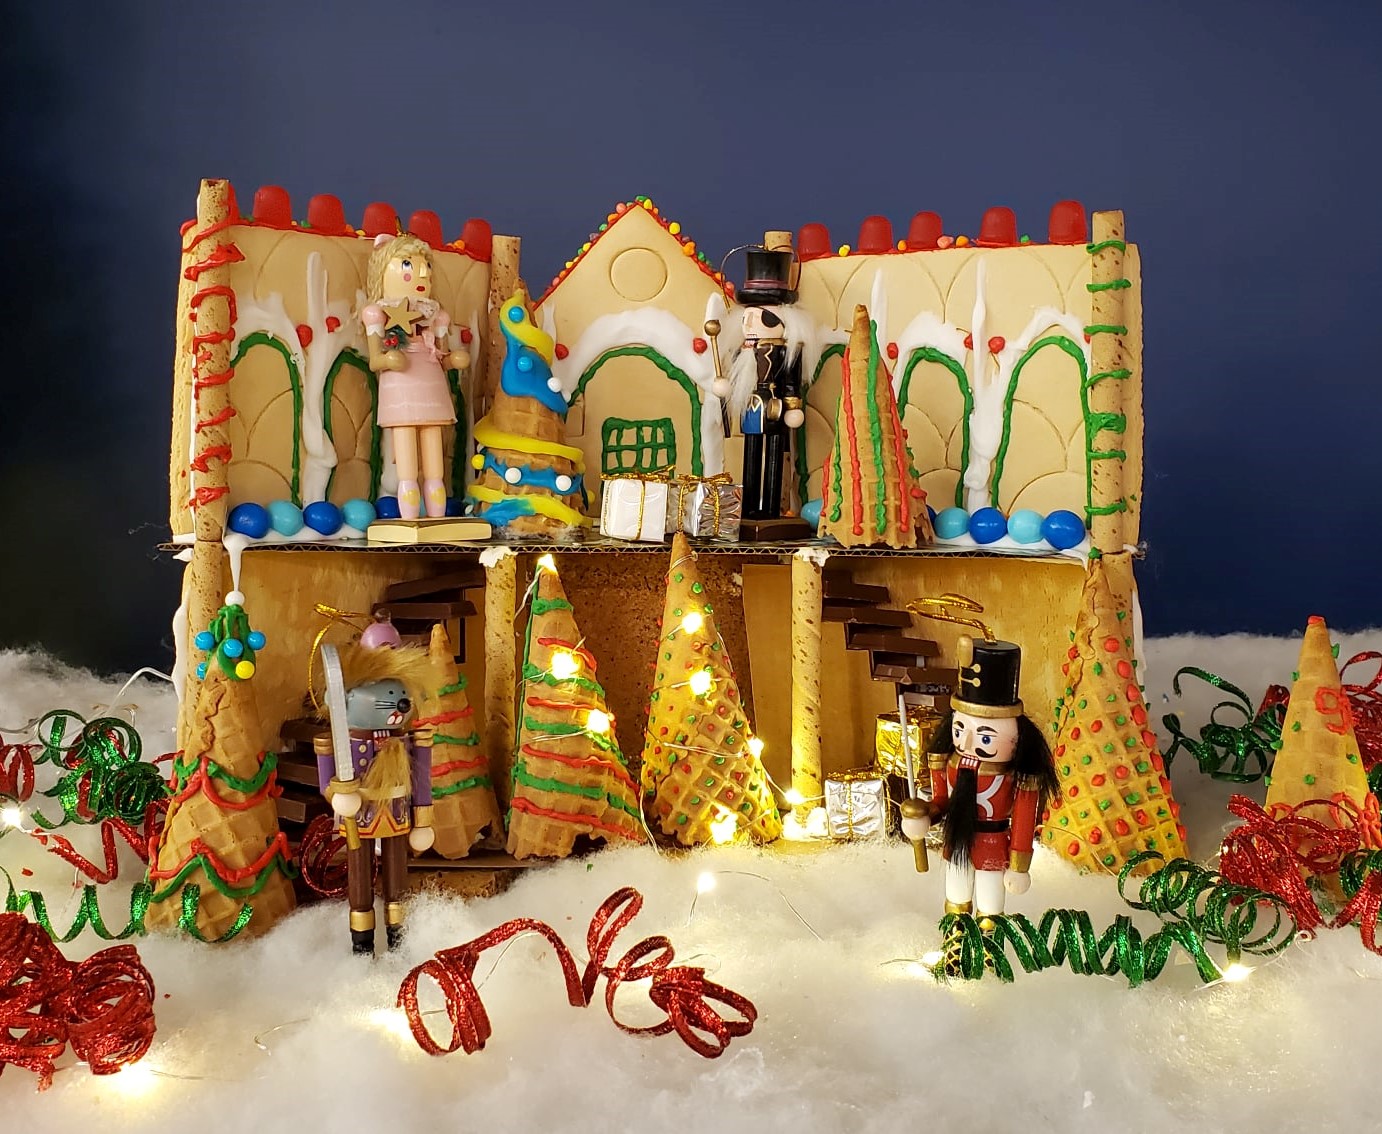 Two story gingerbread house with stairs made of KitKats and nutcracker figures